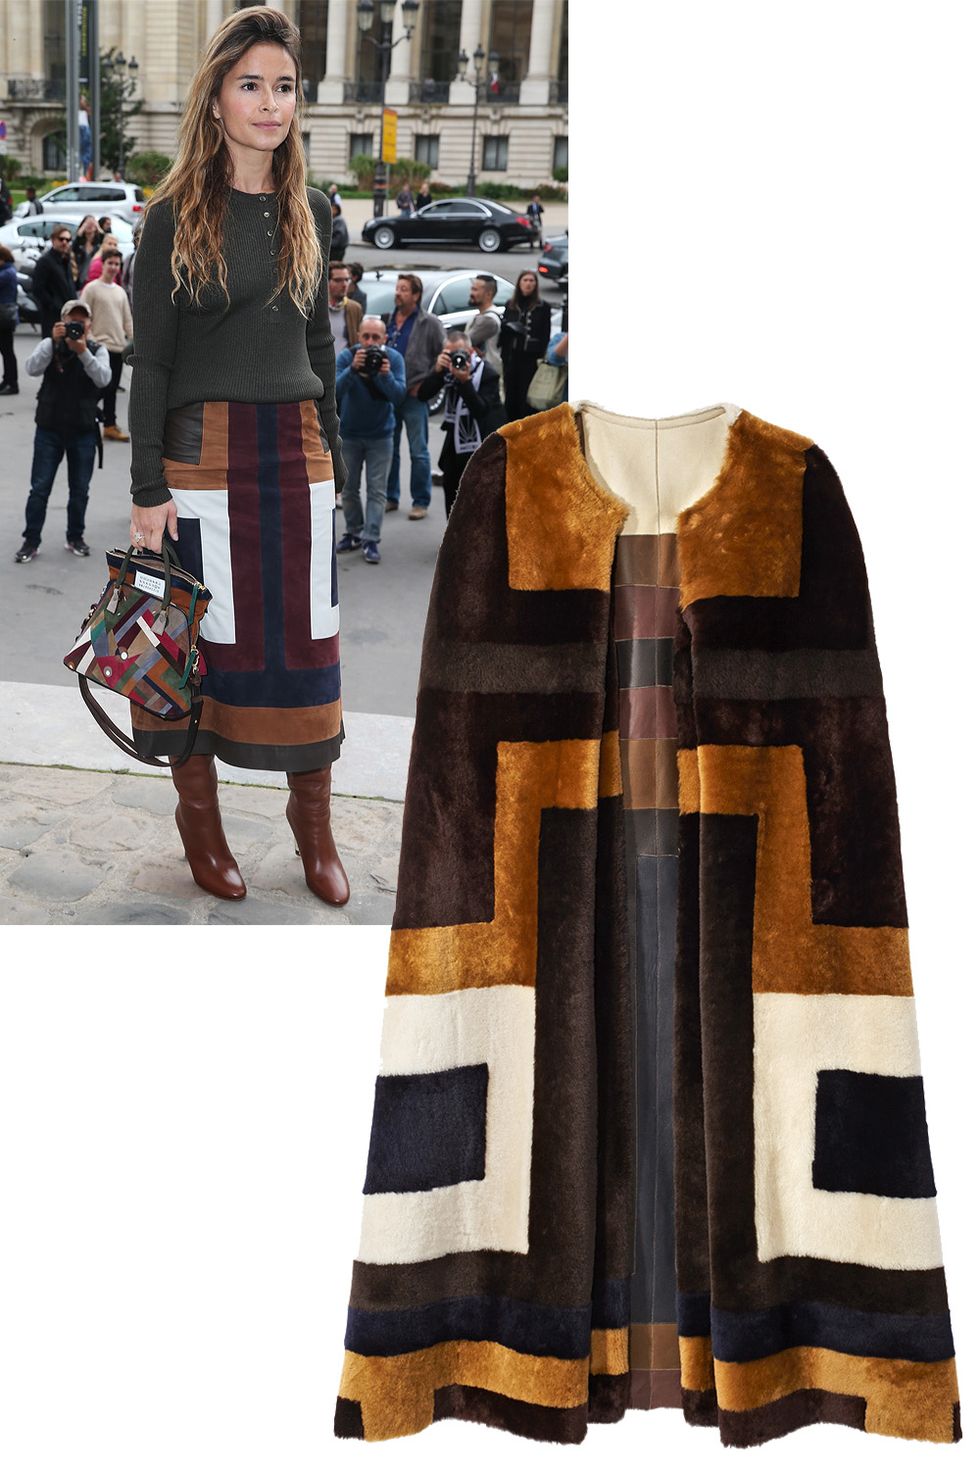 <p>Miroslava Duma<span class="redactor-invisible-space"> had suitcases full of&nbsp;Gabriela Hearst's<span class="redactor-invisible-space"></span></span> design for fashion month, flaunting the labels signature pattern.&nbsp;</p><p><em data-redactor-tag="em" data-verified="redactor">Shop all Gabriela Hearst on <strong data-redactor-tag="strong" data-verified="redactor"><a href="https://shop.harpersbazaar.com/g/gabriela-hearst/sitwell-skirt-10473.html" target="_blank">ShopBAZAAR.com</a></strong>.&nbsp;</em></p>